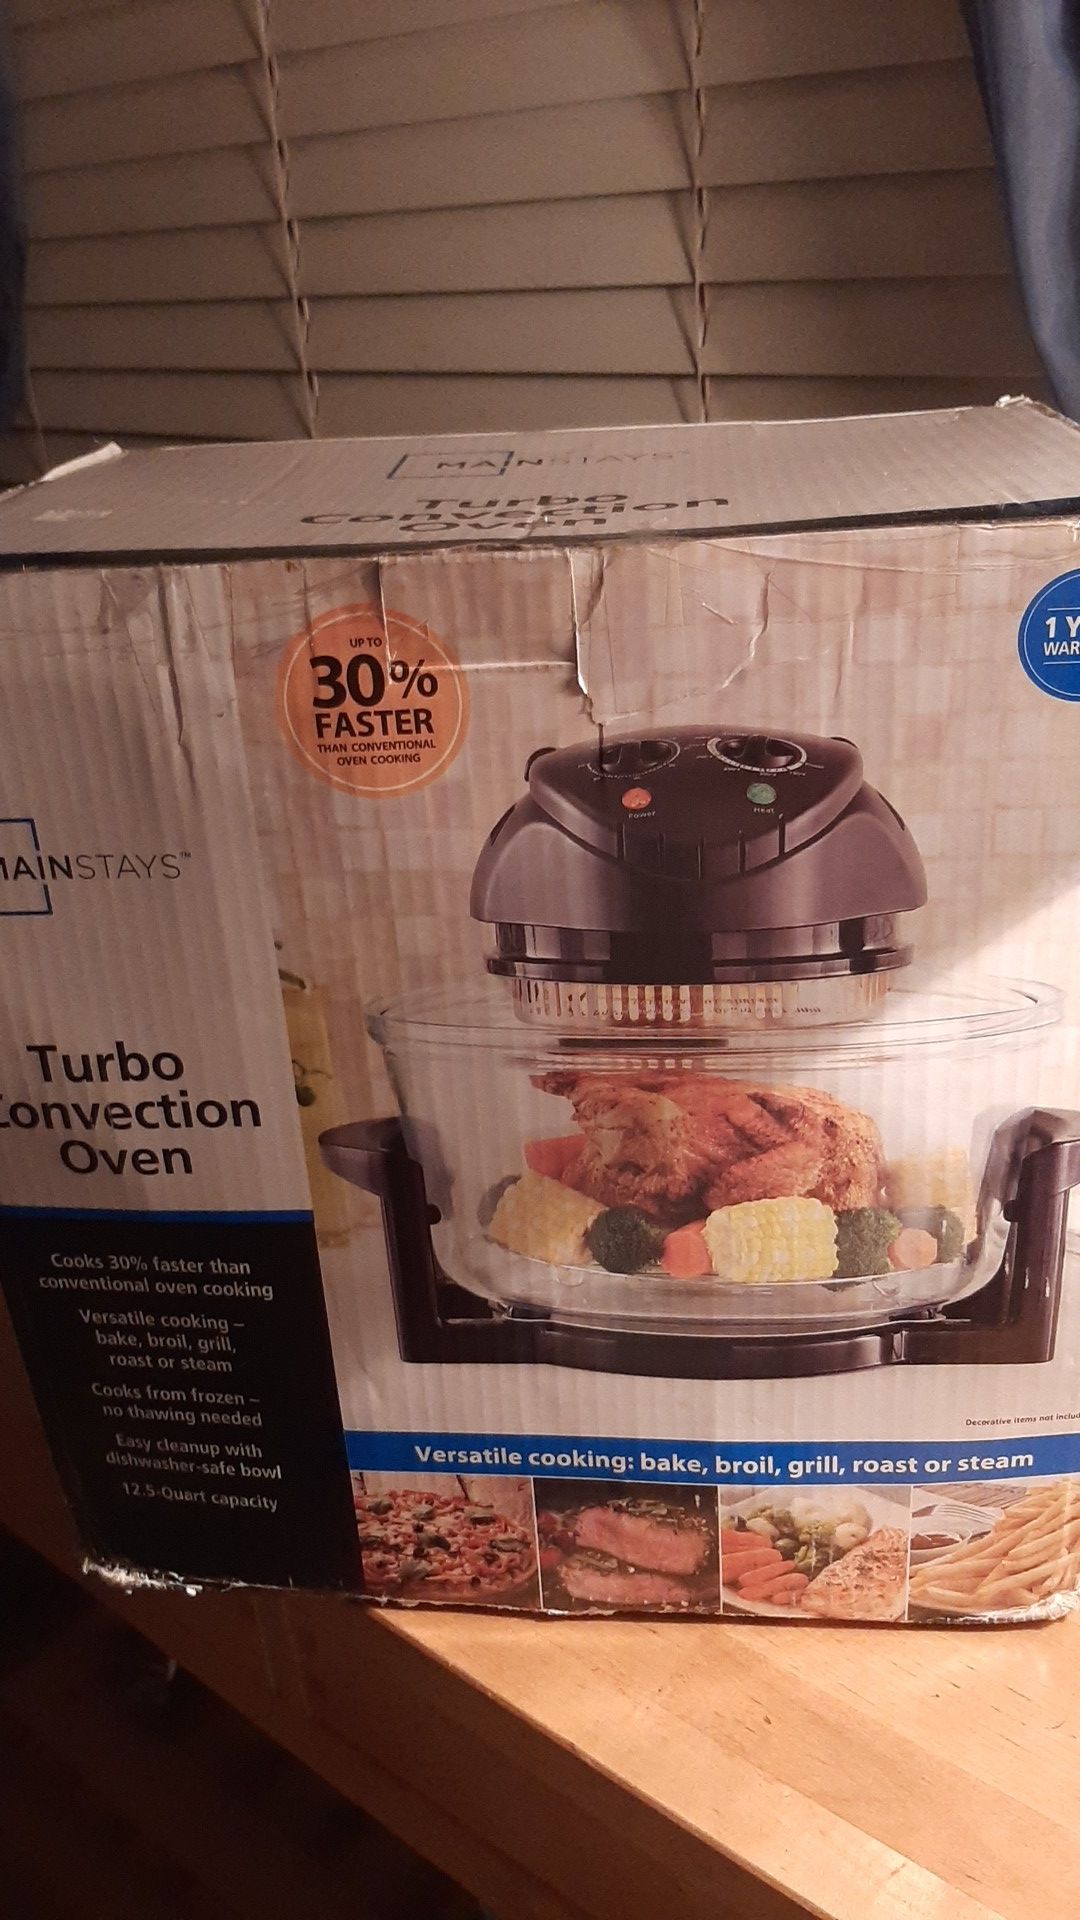 Mainstays turbo convection oven.